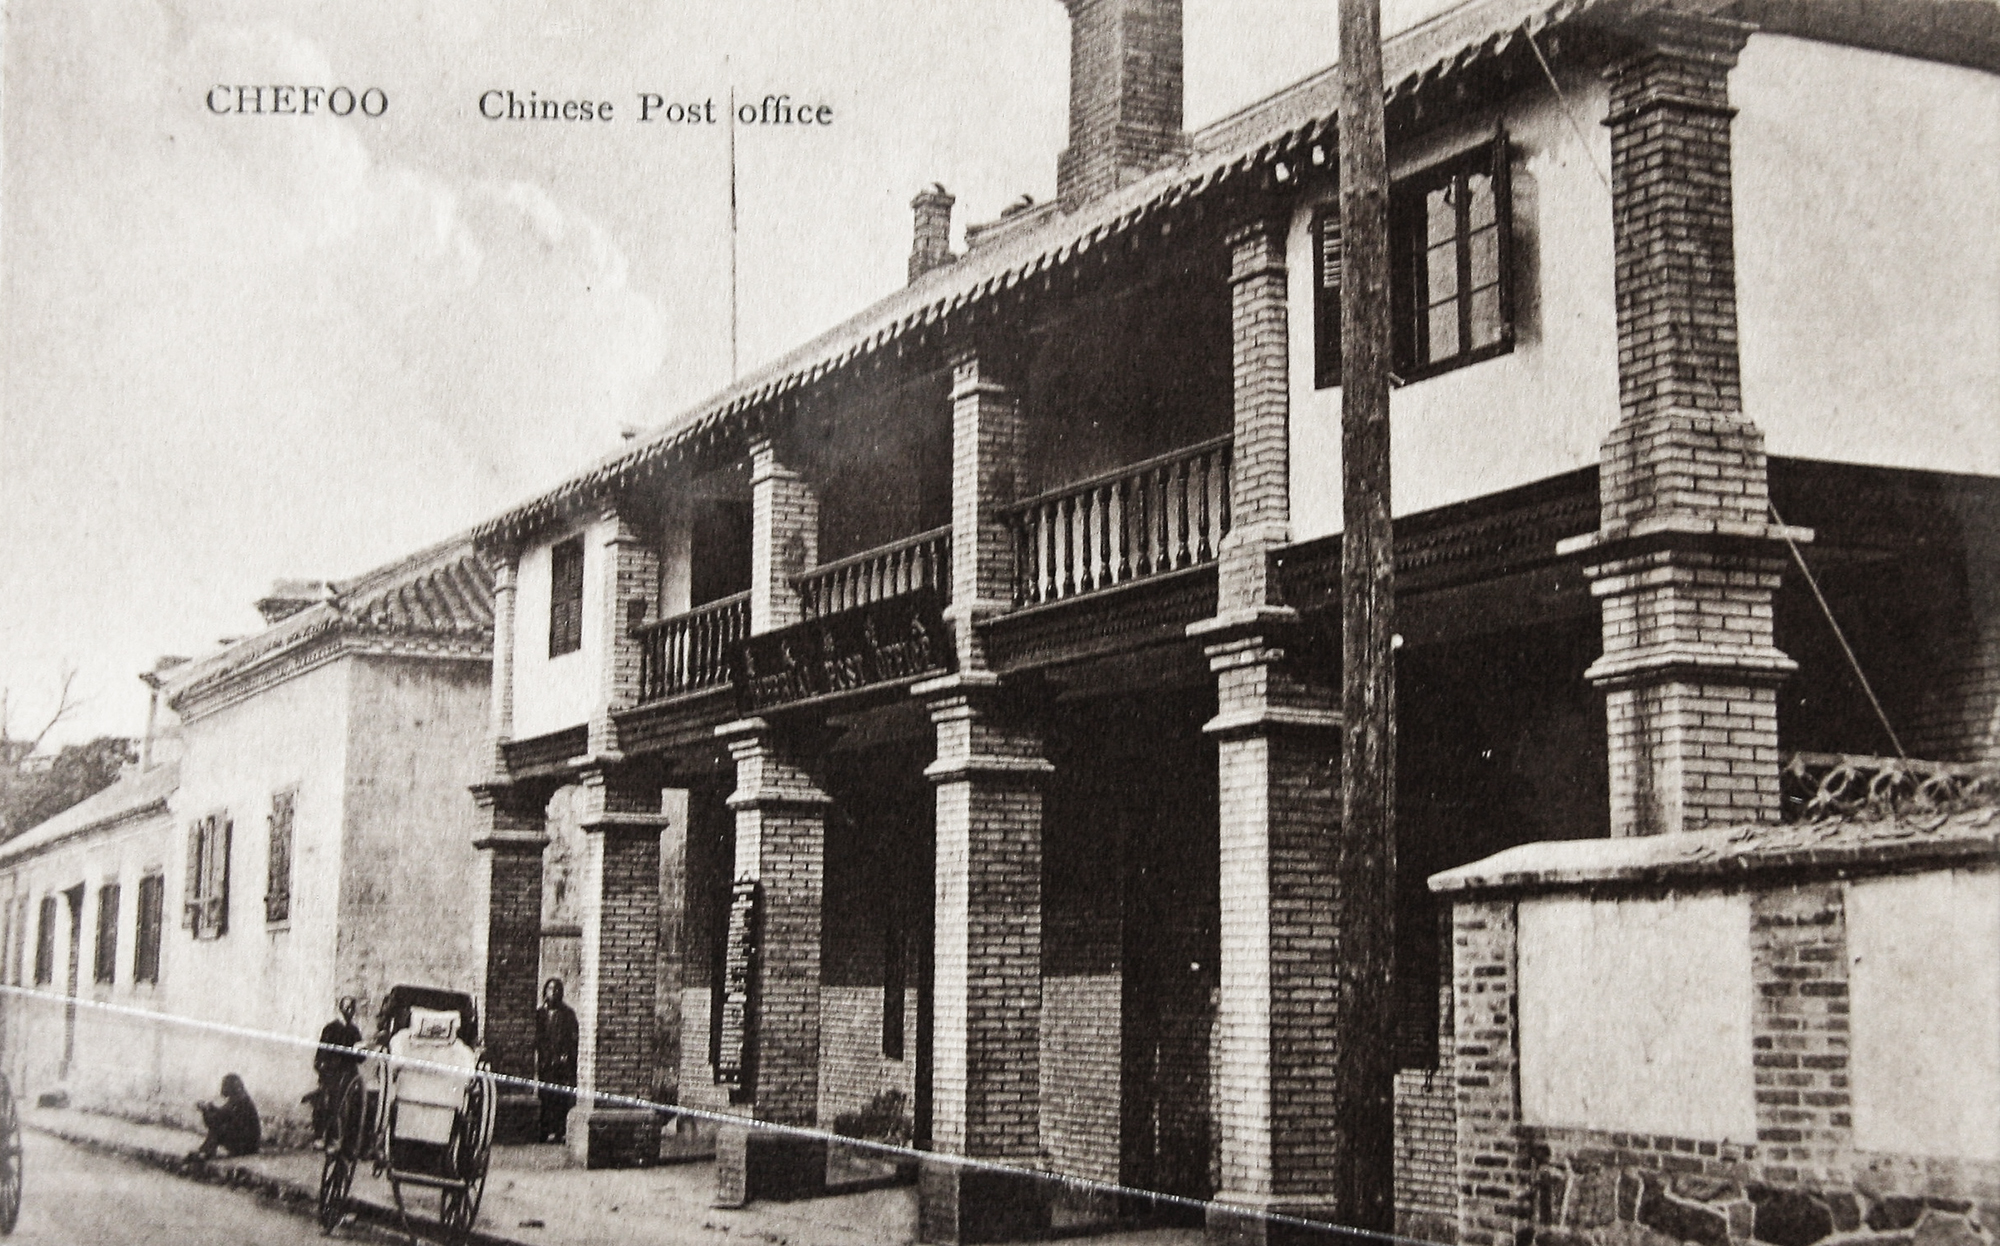 Chinese Post Office, Chefoo. Post card courtesy of Lin Weibin.